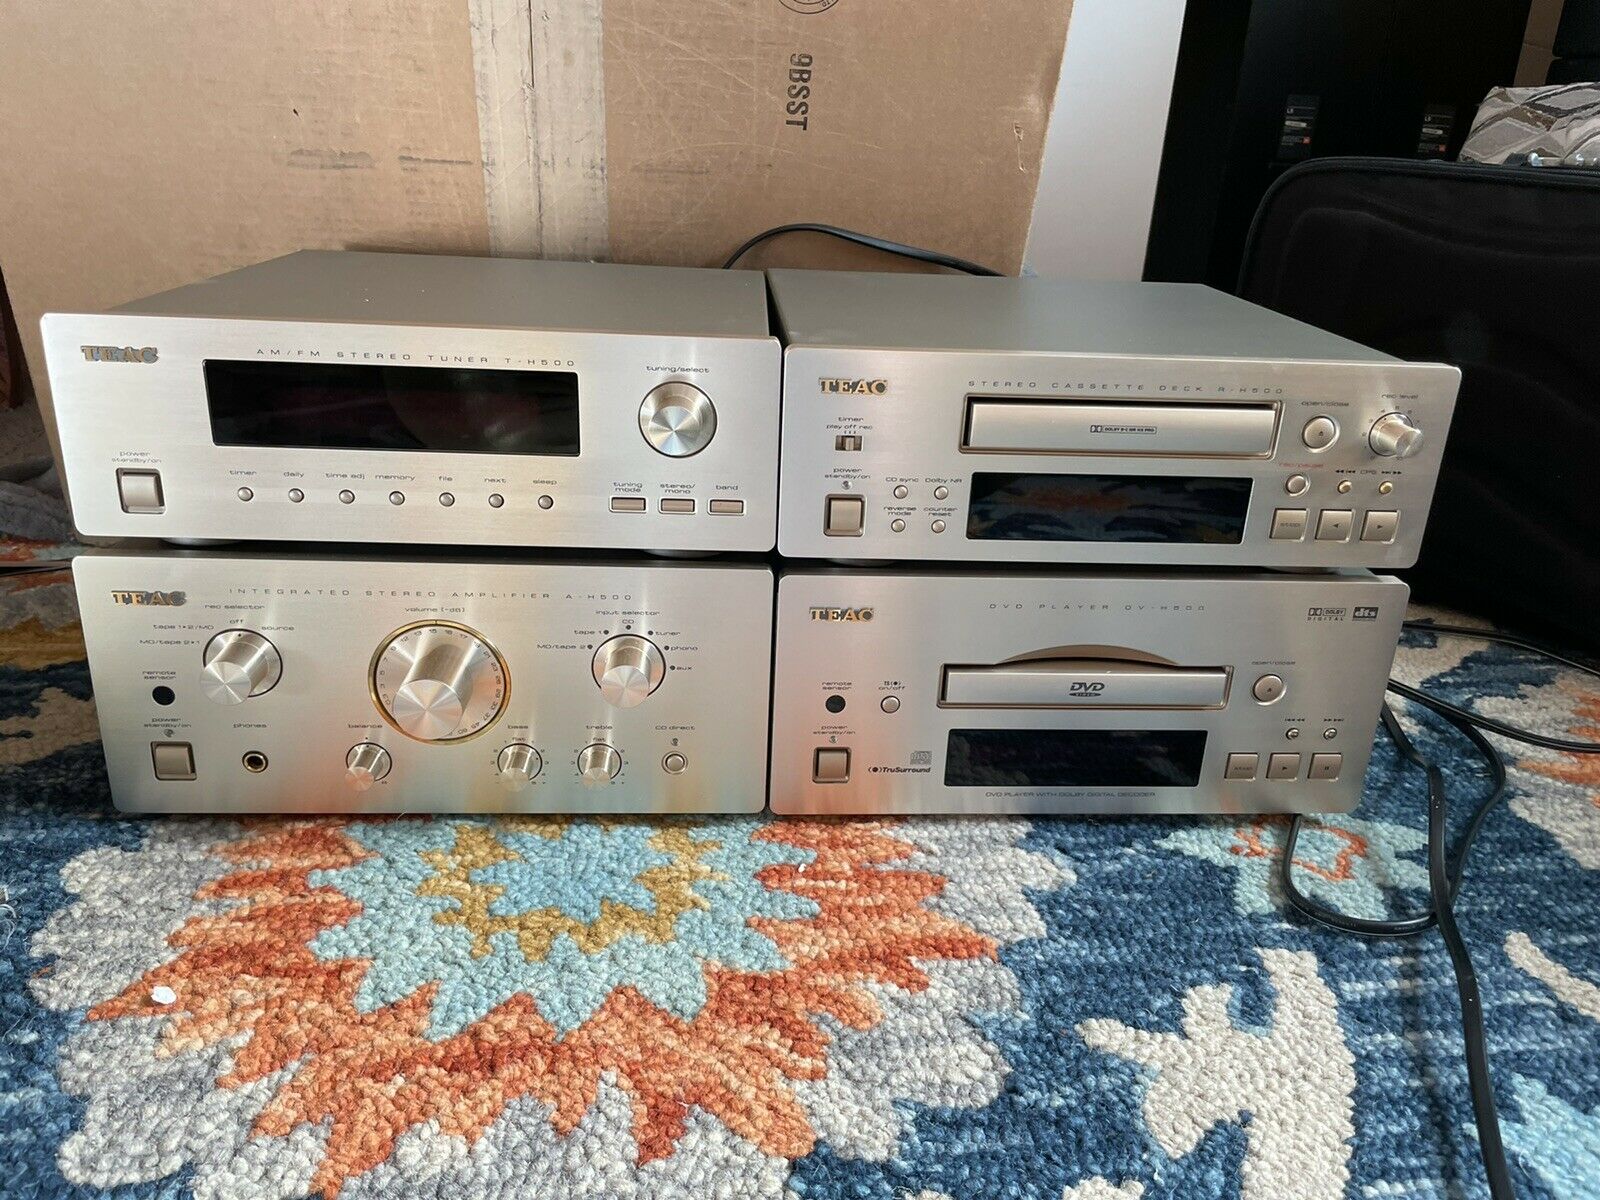 Teac Reference 500 Series: A-h500 Amplifier, T-h500 Tuner, Dv-h500 Cd/dvd R-h500